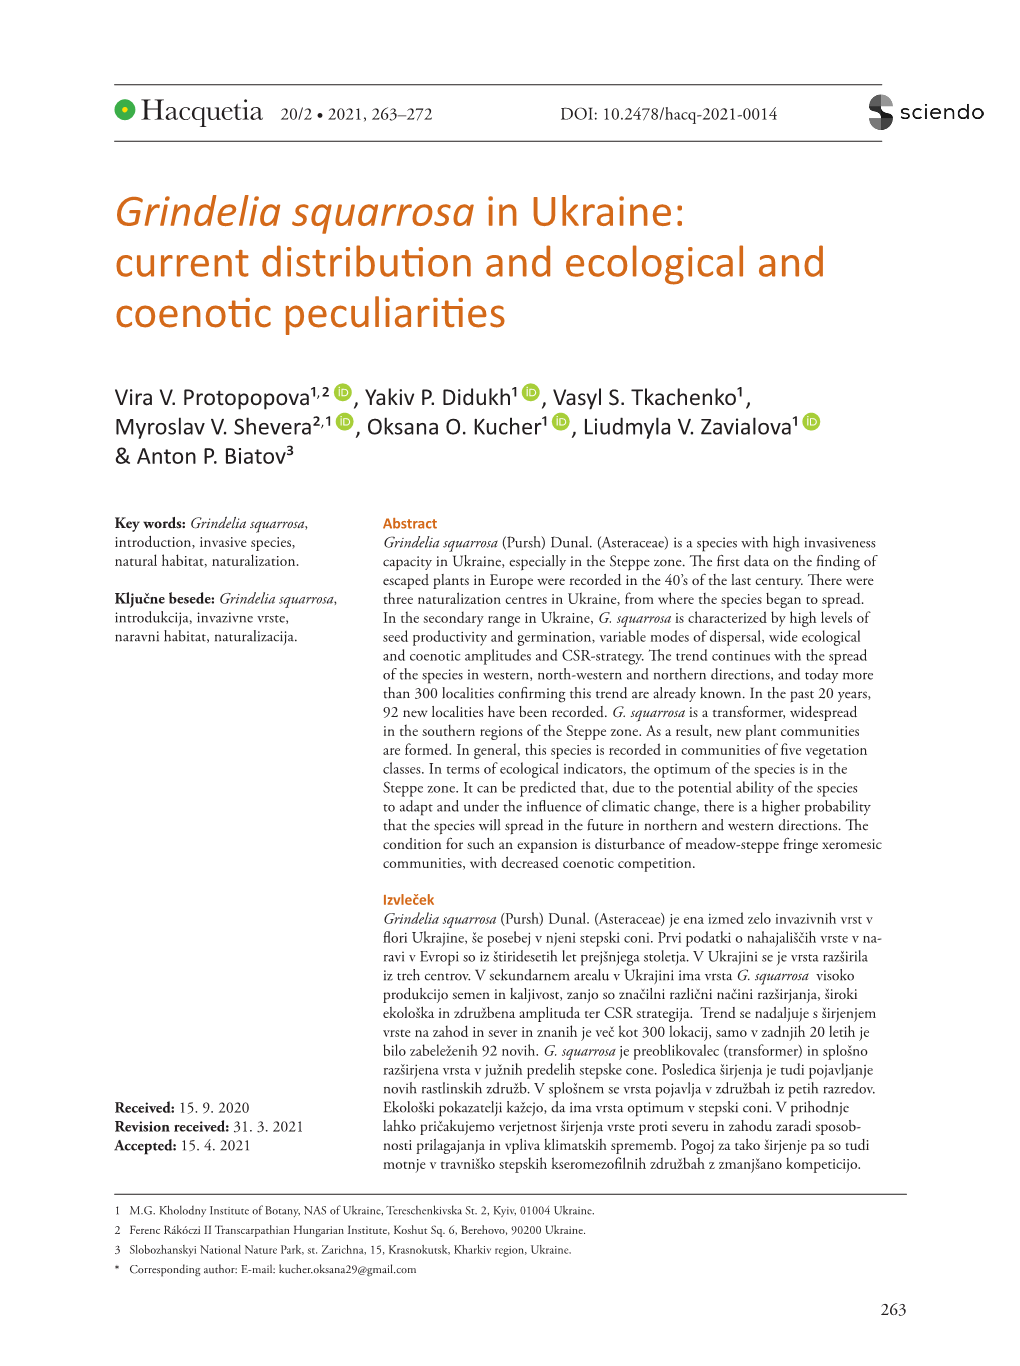 Grindelia Squarrosa in Ukraine: Current Distribution and Ecological and Coenotic Peculiarities